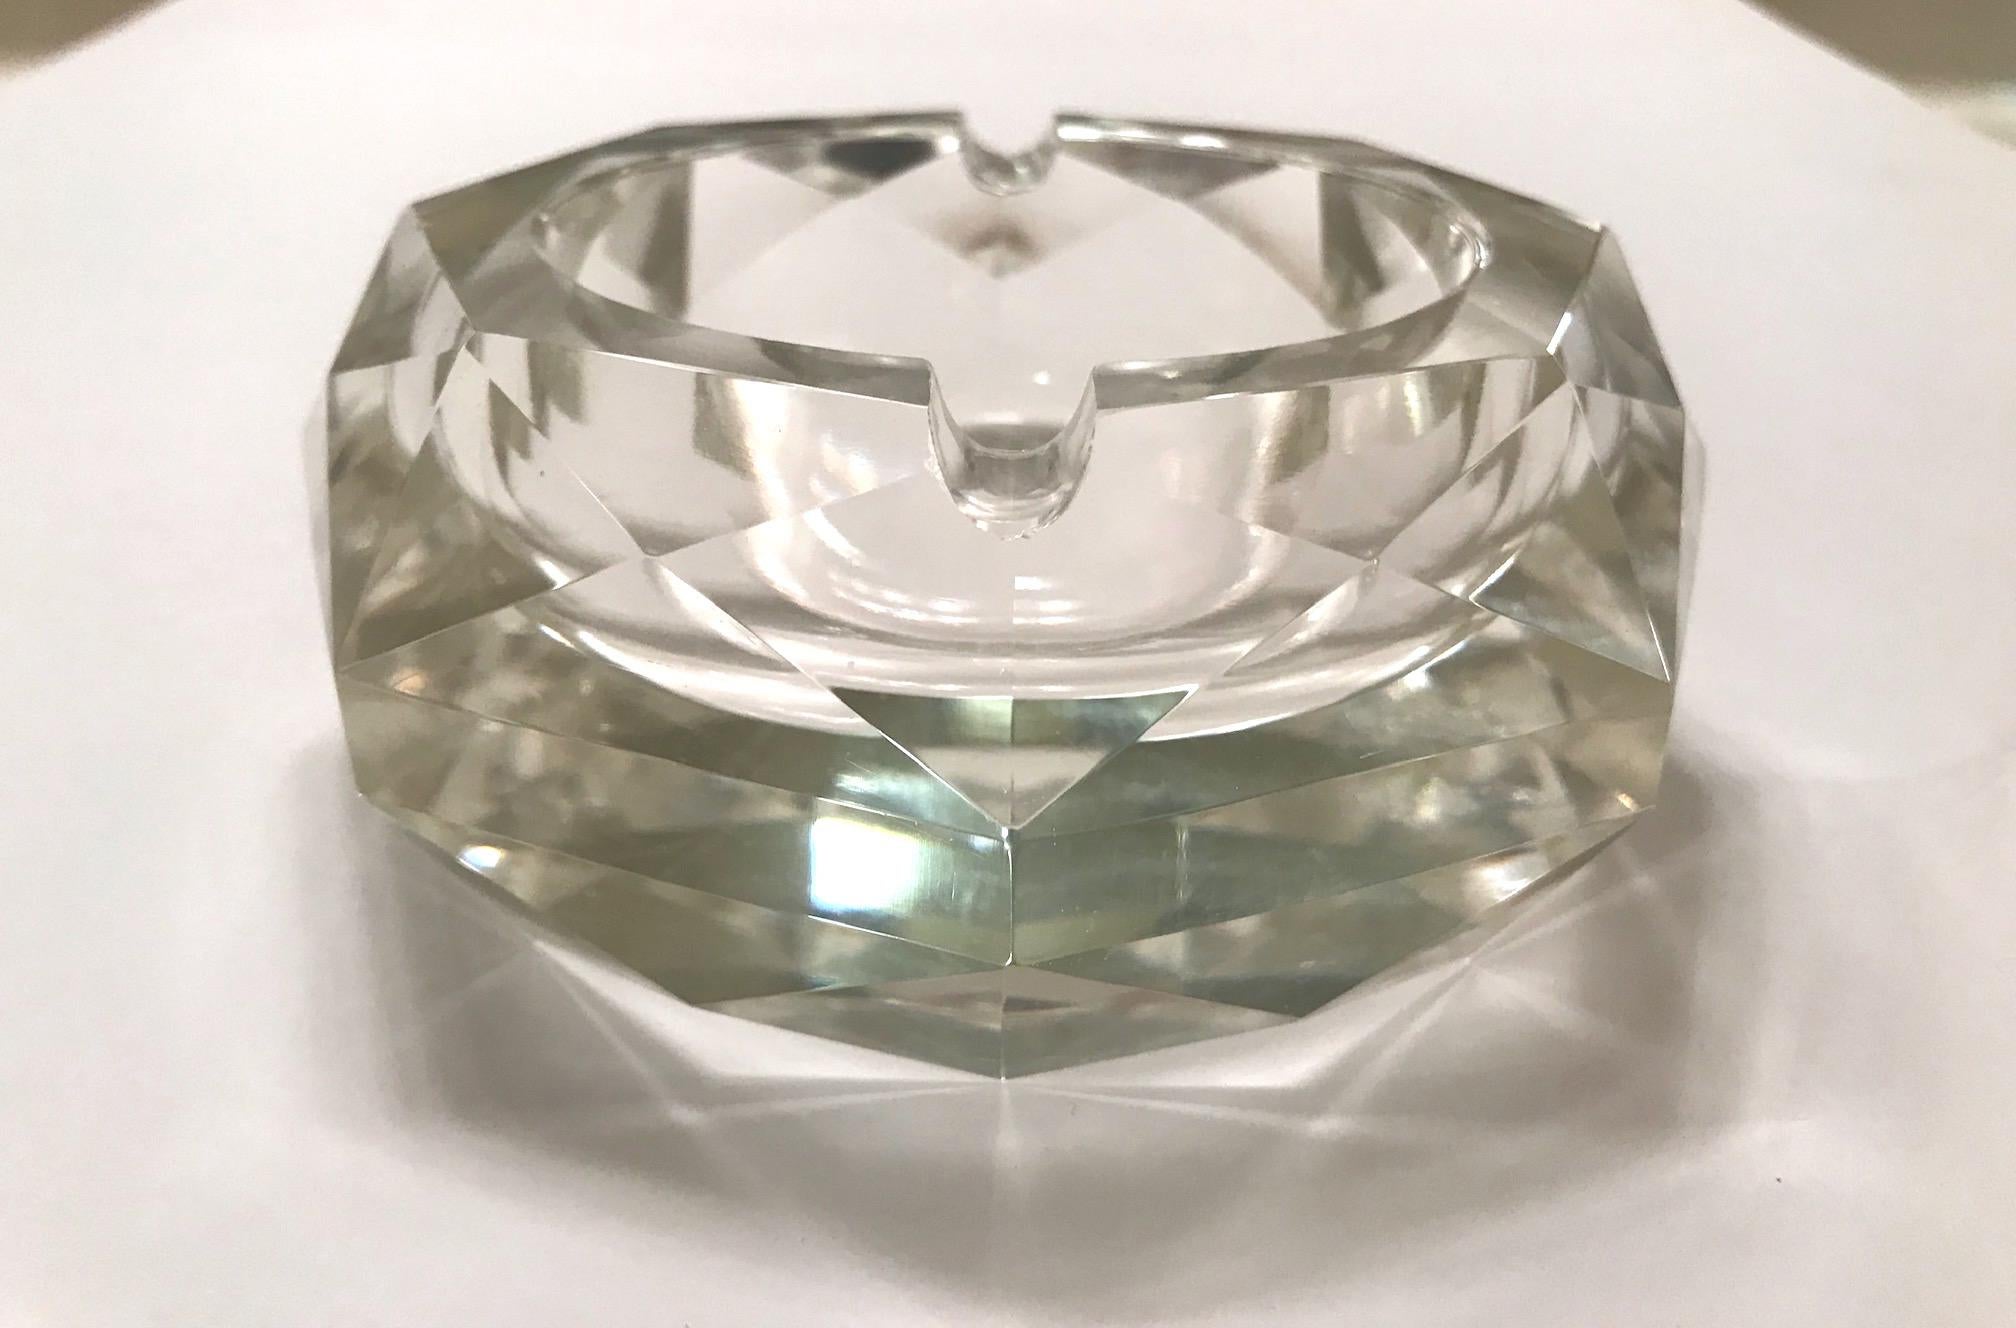 Stunning clear Murano glass ashtray with octagon form and spectacular faceted design, creating prisms of light. Shines like a diamond and is heavy in weight. Fitted with two notches for cigarettes, or can be used as decorative bowl. Gorgeous from